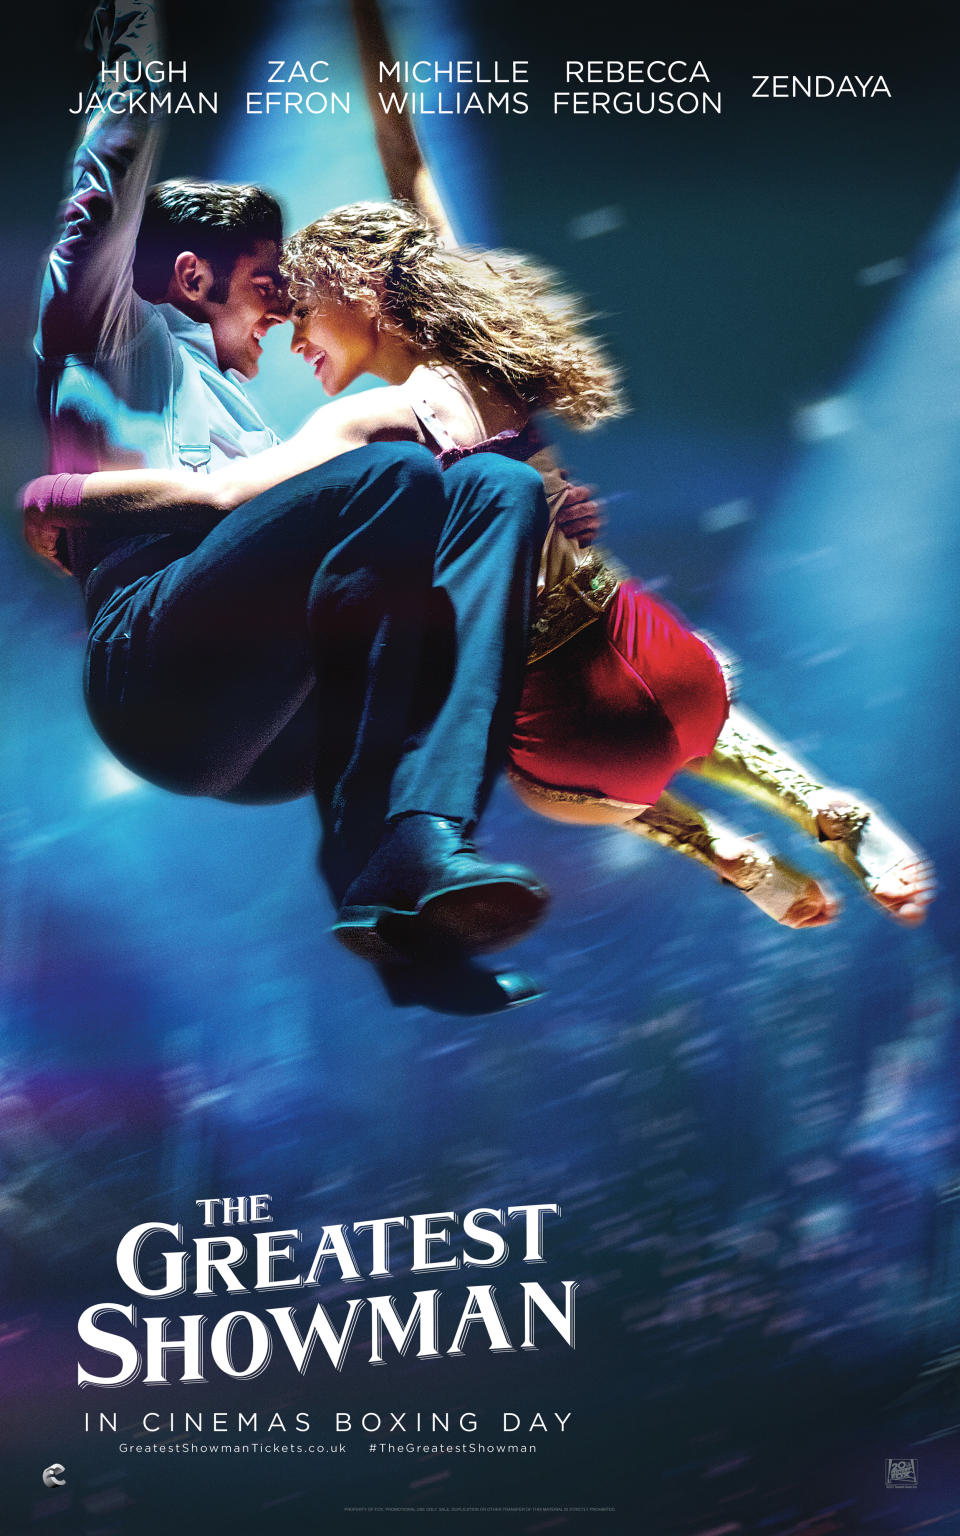 Zac and Zendaya play star-crossed lovers in the musical (20th Century Fox)